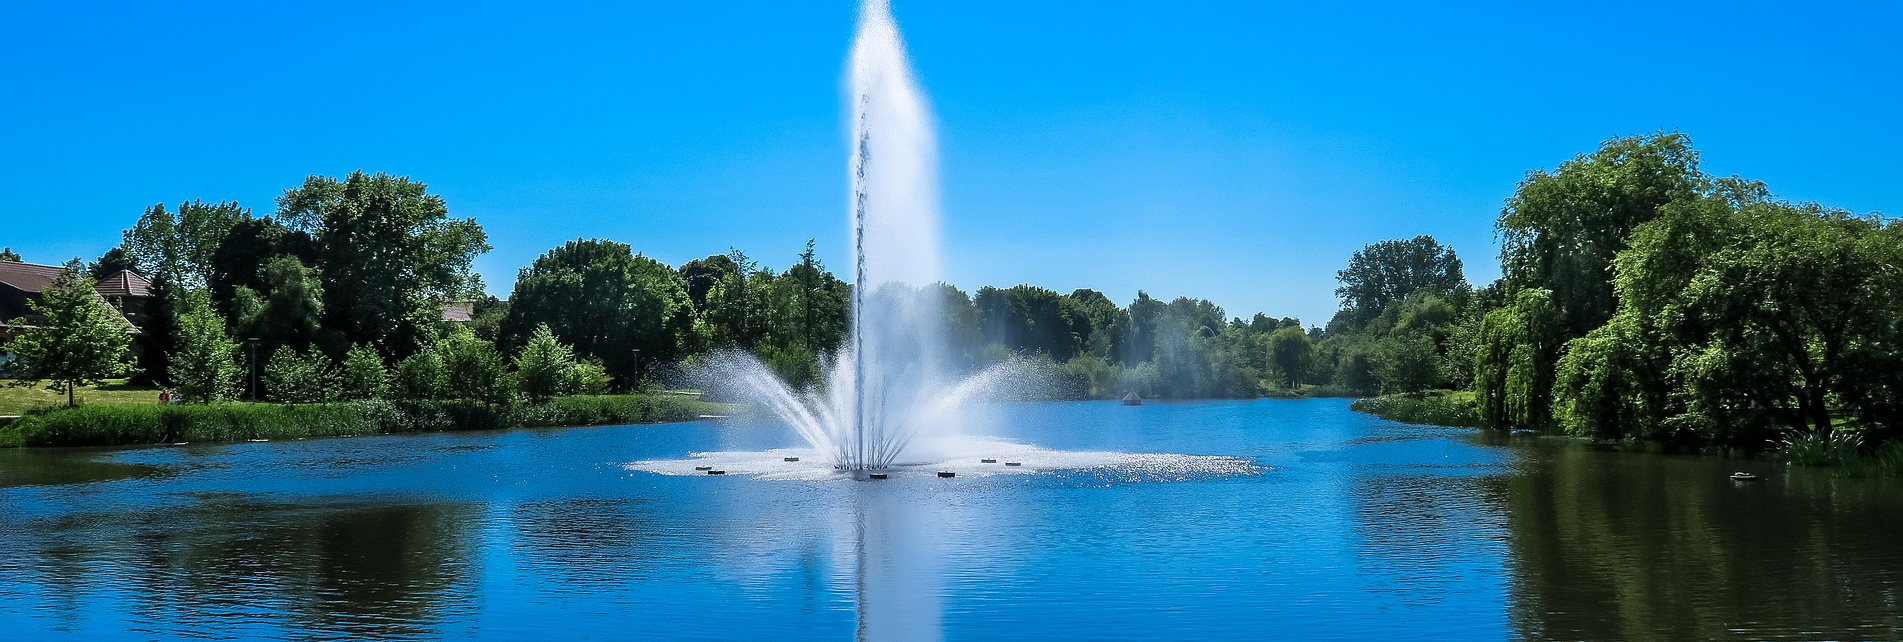 The Lake Doctor - lake management floating fountains Dallas Fort Worth Texas - Lake Management Company - Floating Fountains Aeration Systems Vegetation Control Fish Fish Feeders Installation & Design